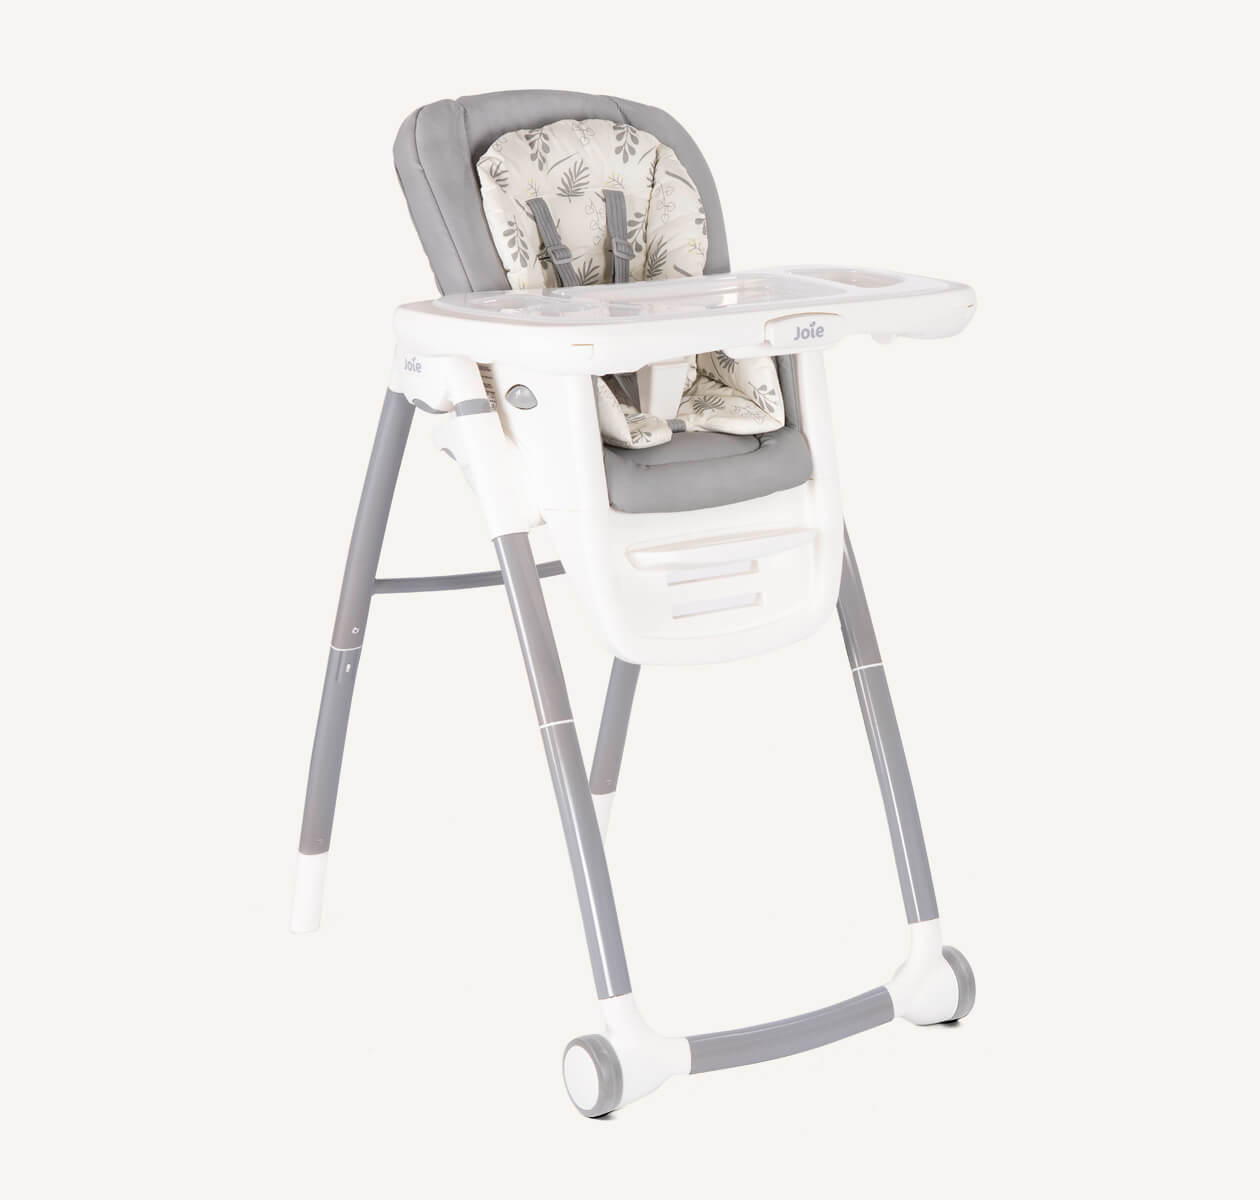 A multiply highchair with light grey and starts patterns seat, white tray with grey front wheels on a right angle.